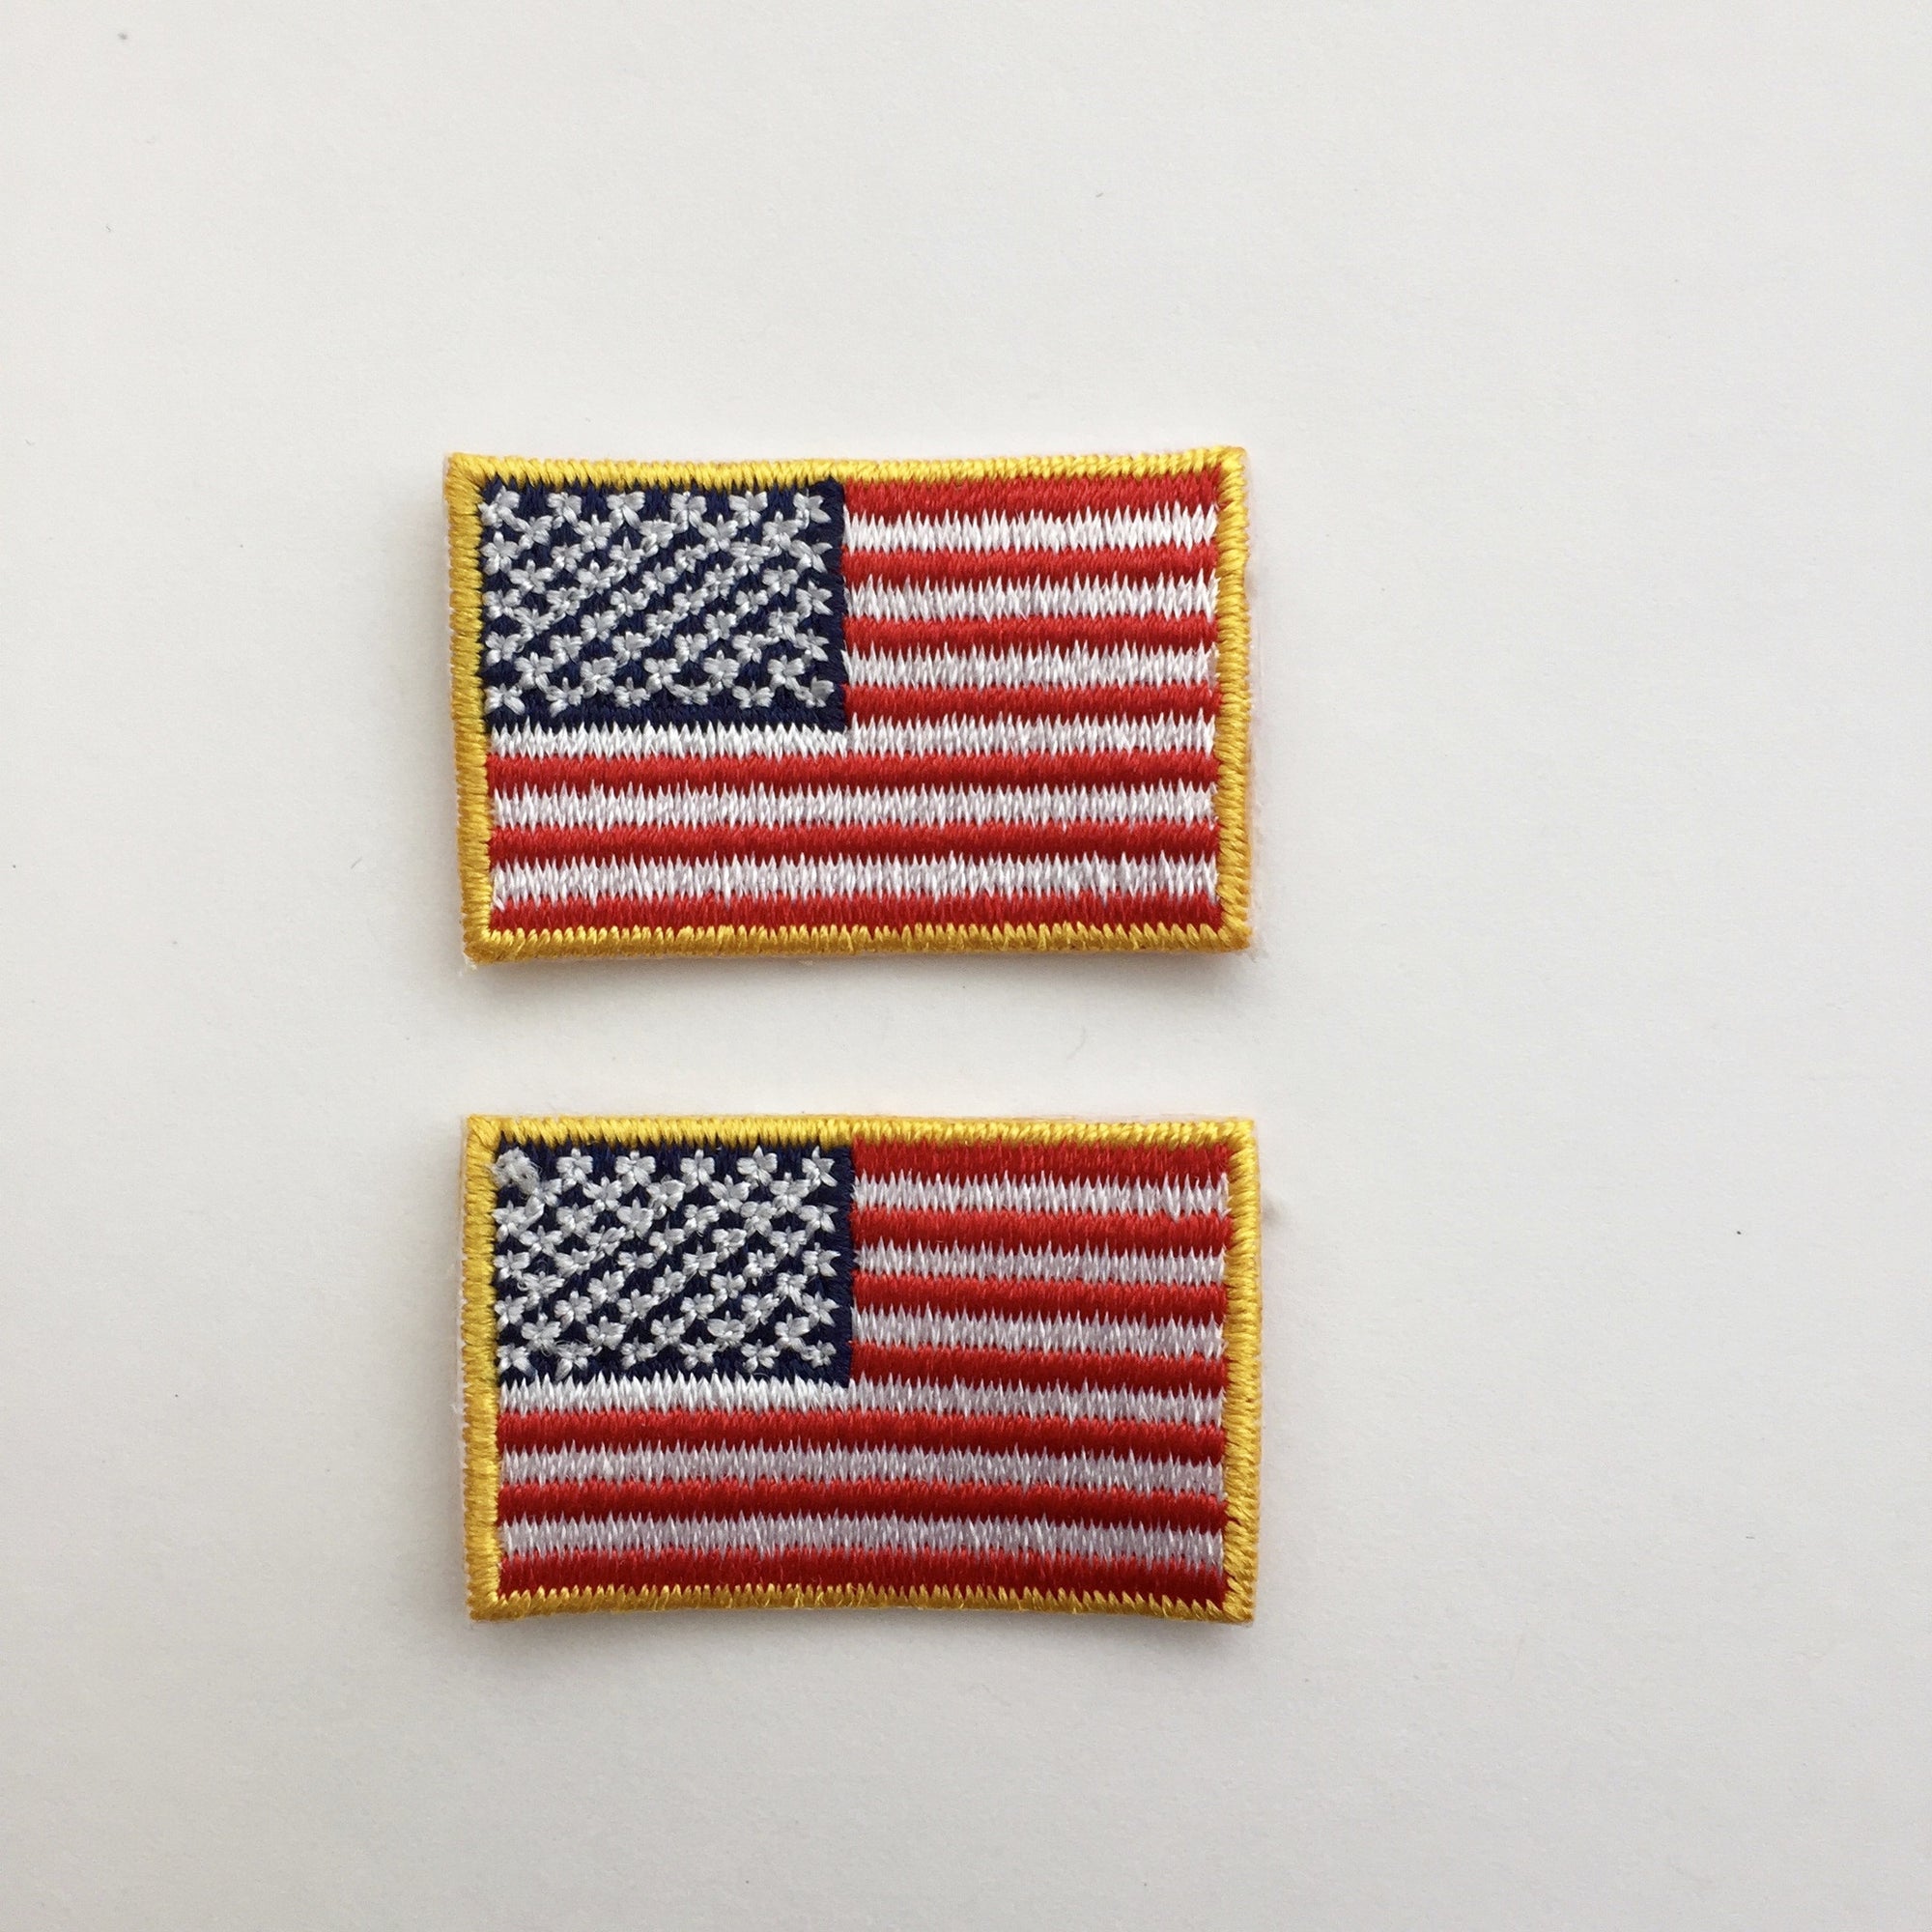 3 Vintage Embroidered US Flag Patch 3.5x2.5 